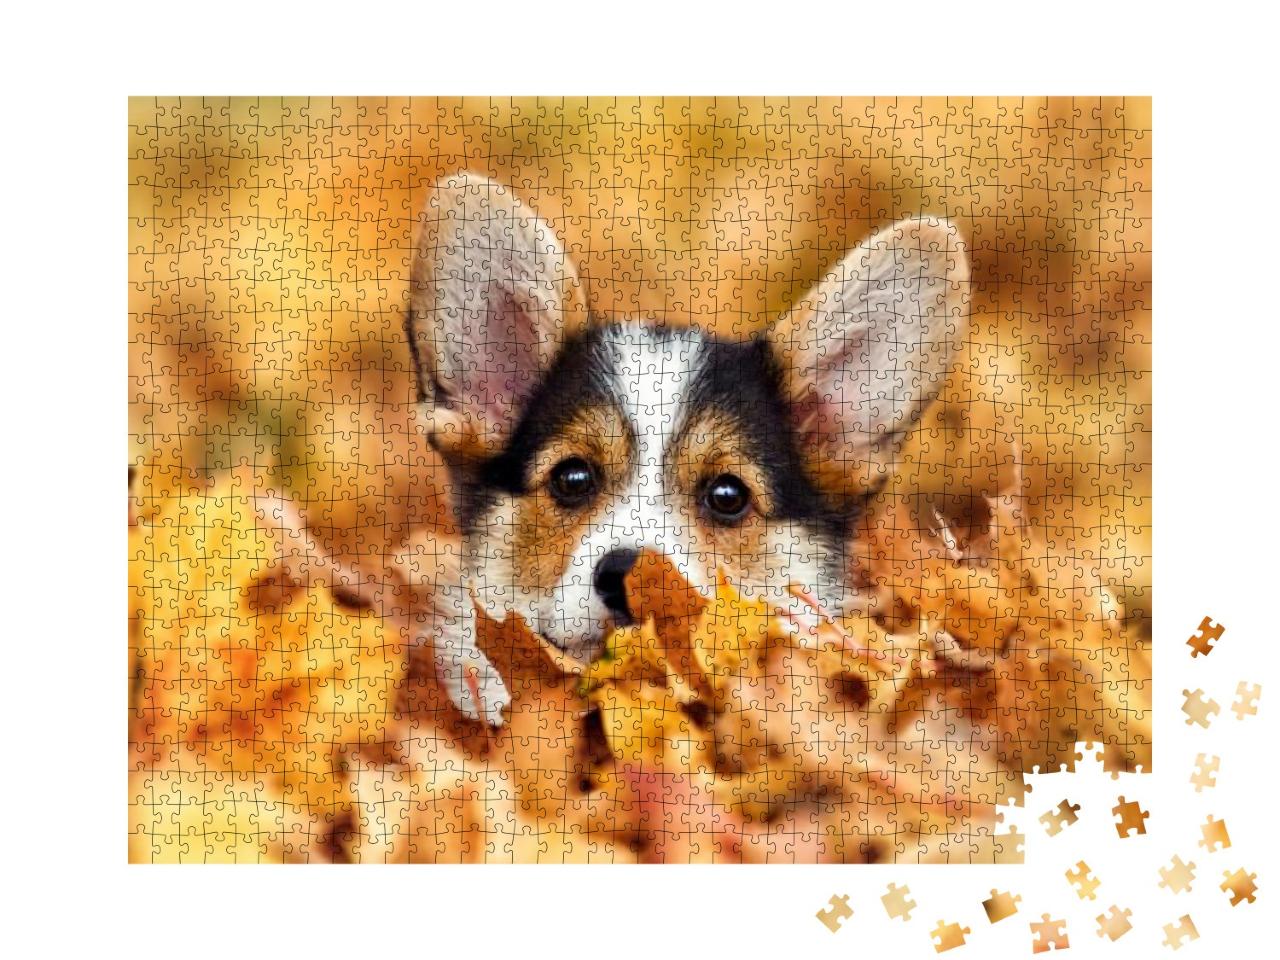 Welsh Corgi Puppy in Autumn Leaves... Jigsaw Puzzle with 1000 pieces